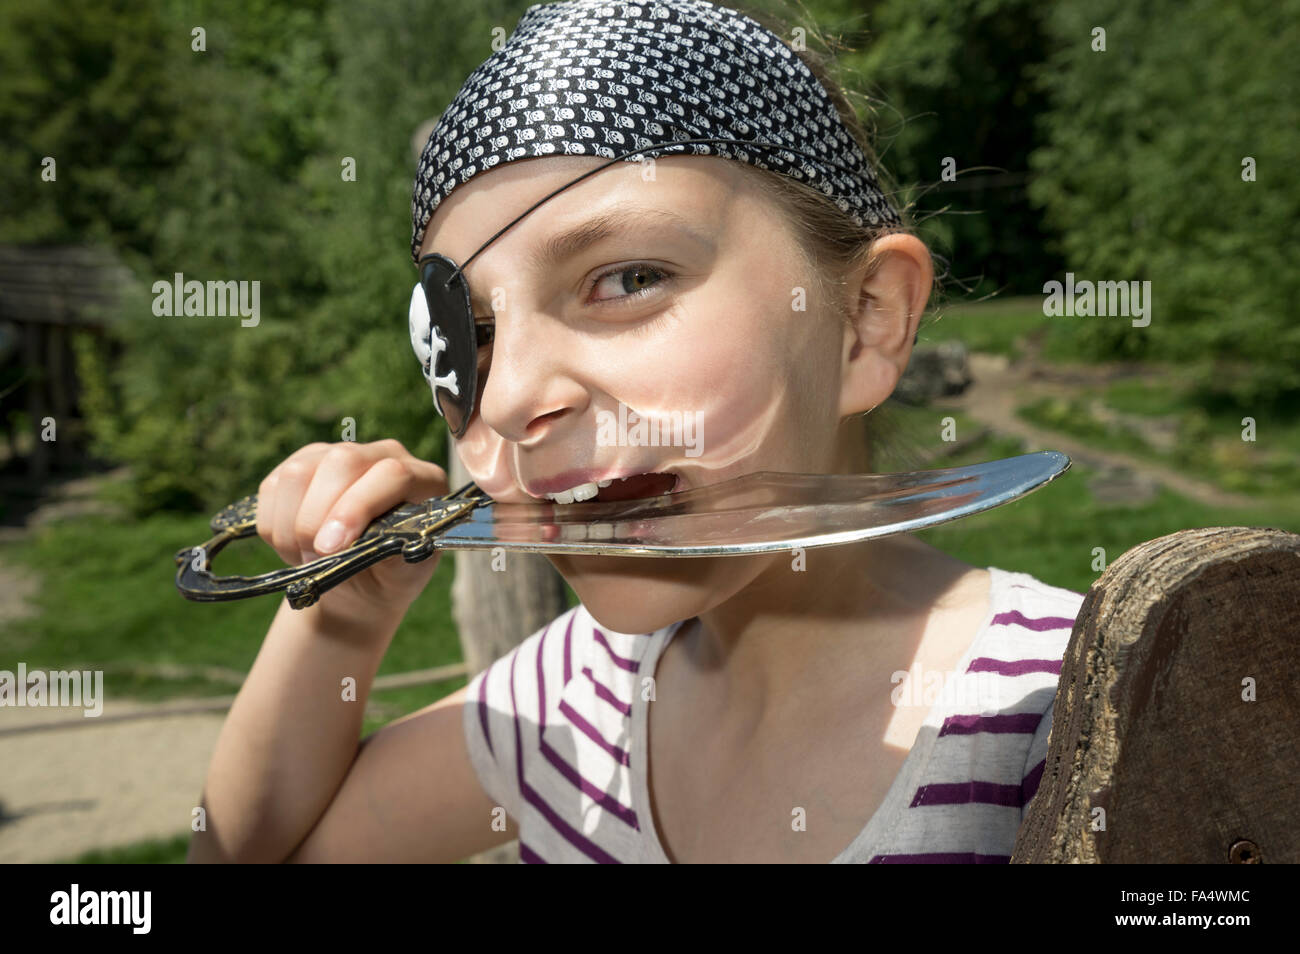 Portrait of a girl dressed up as a pirate biting saber in playground, Bavaria, Germany Stock Photo